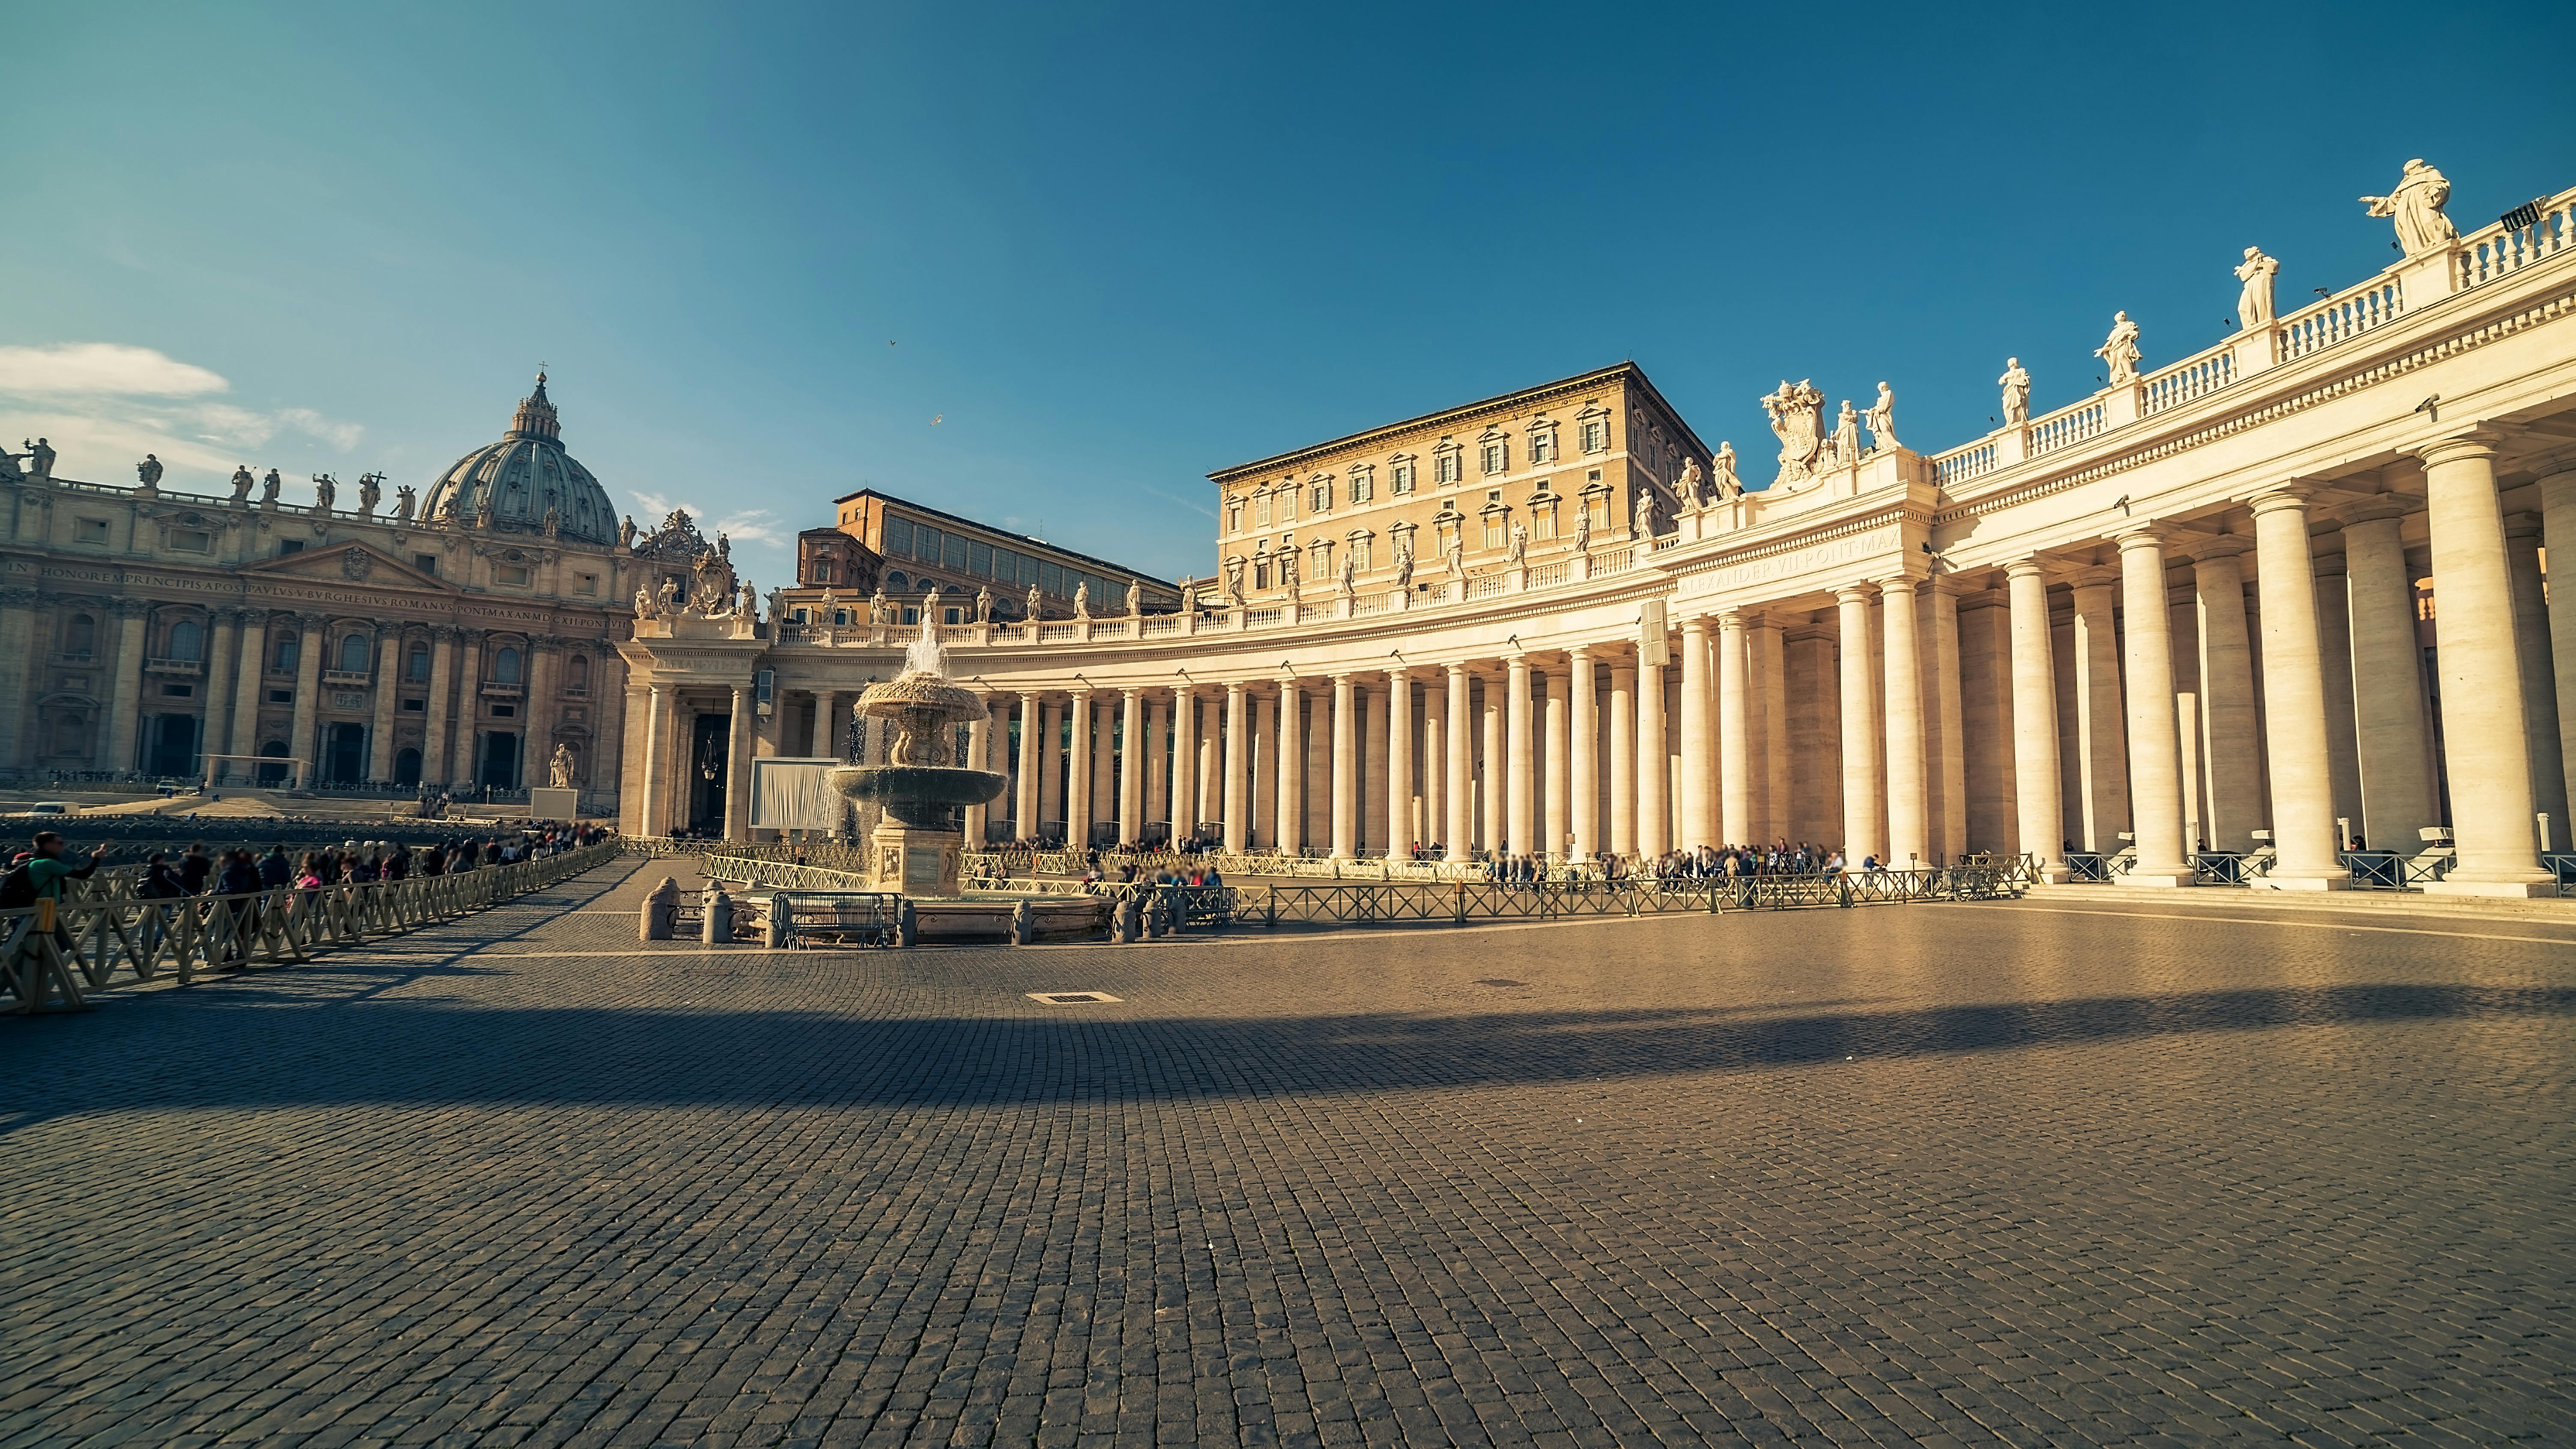 Vatican Museum guided tour and city sightseeing Rome  hop-on hop-off